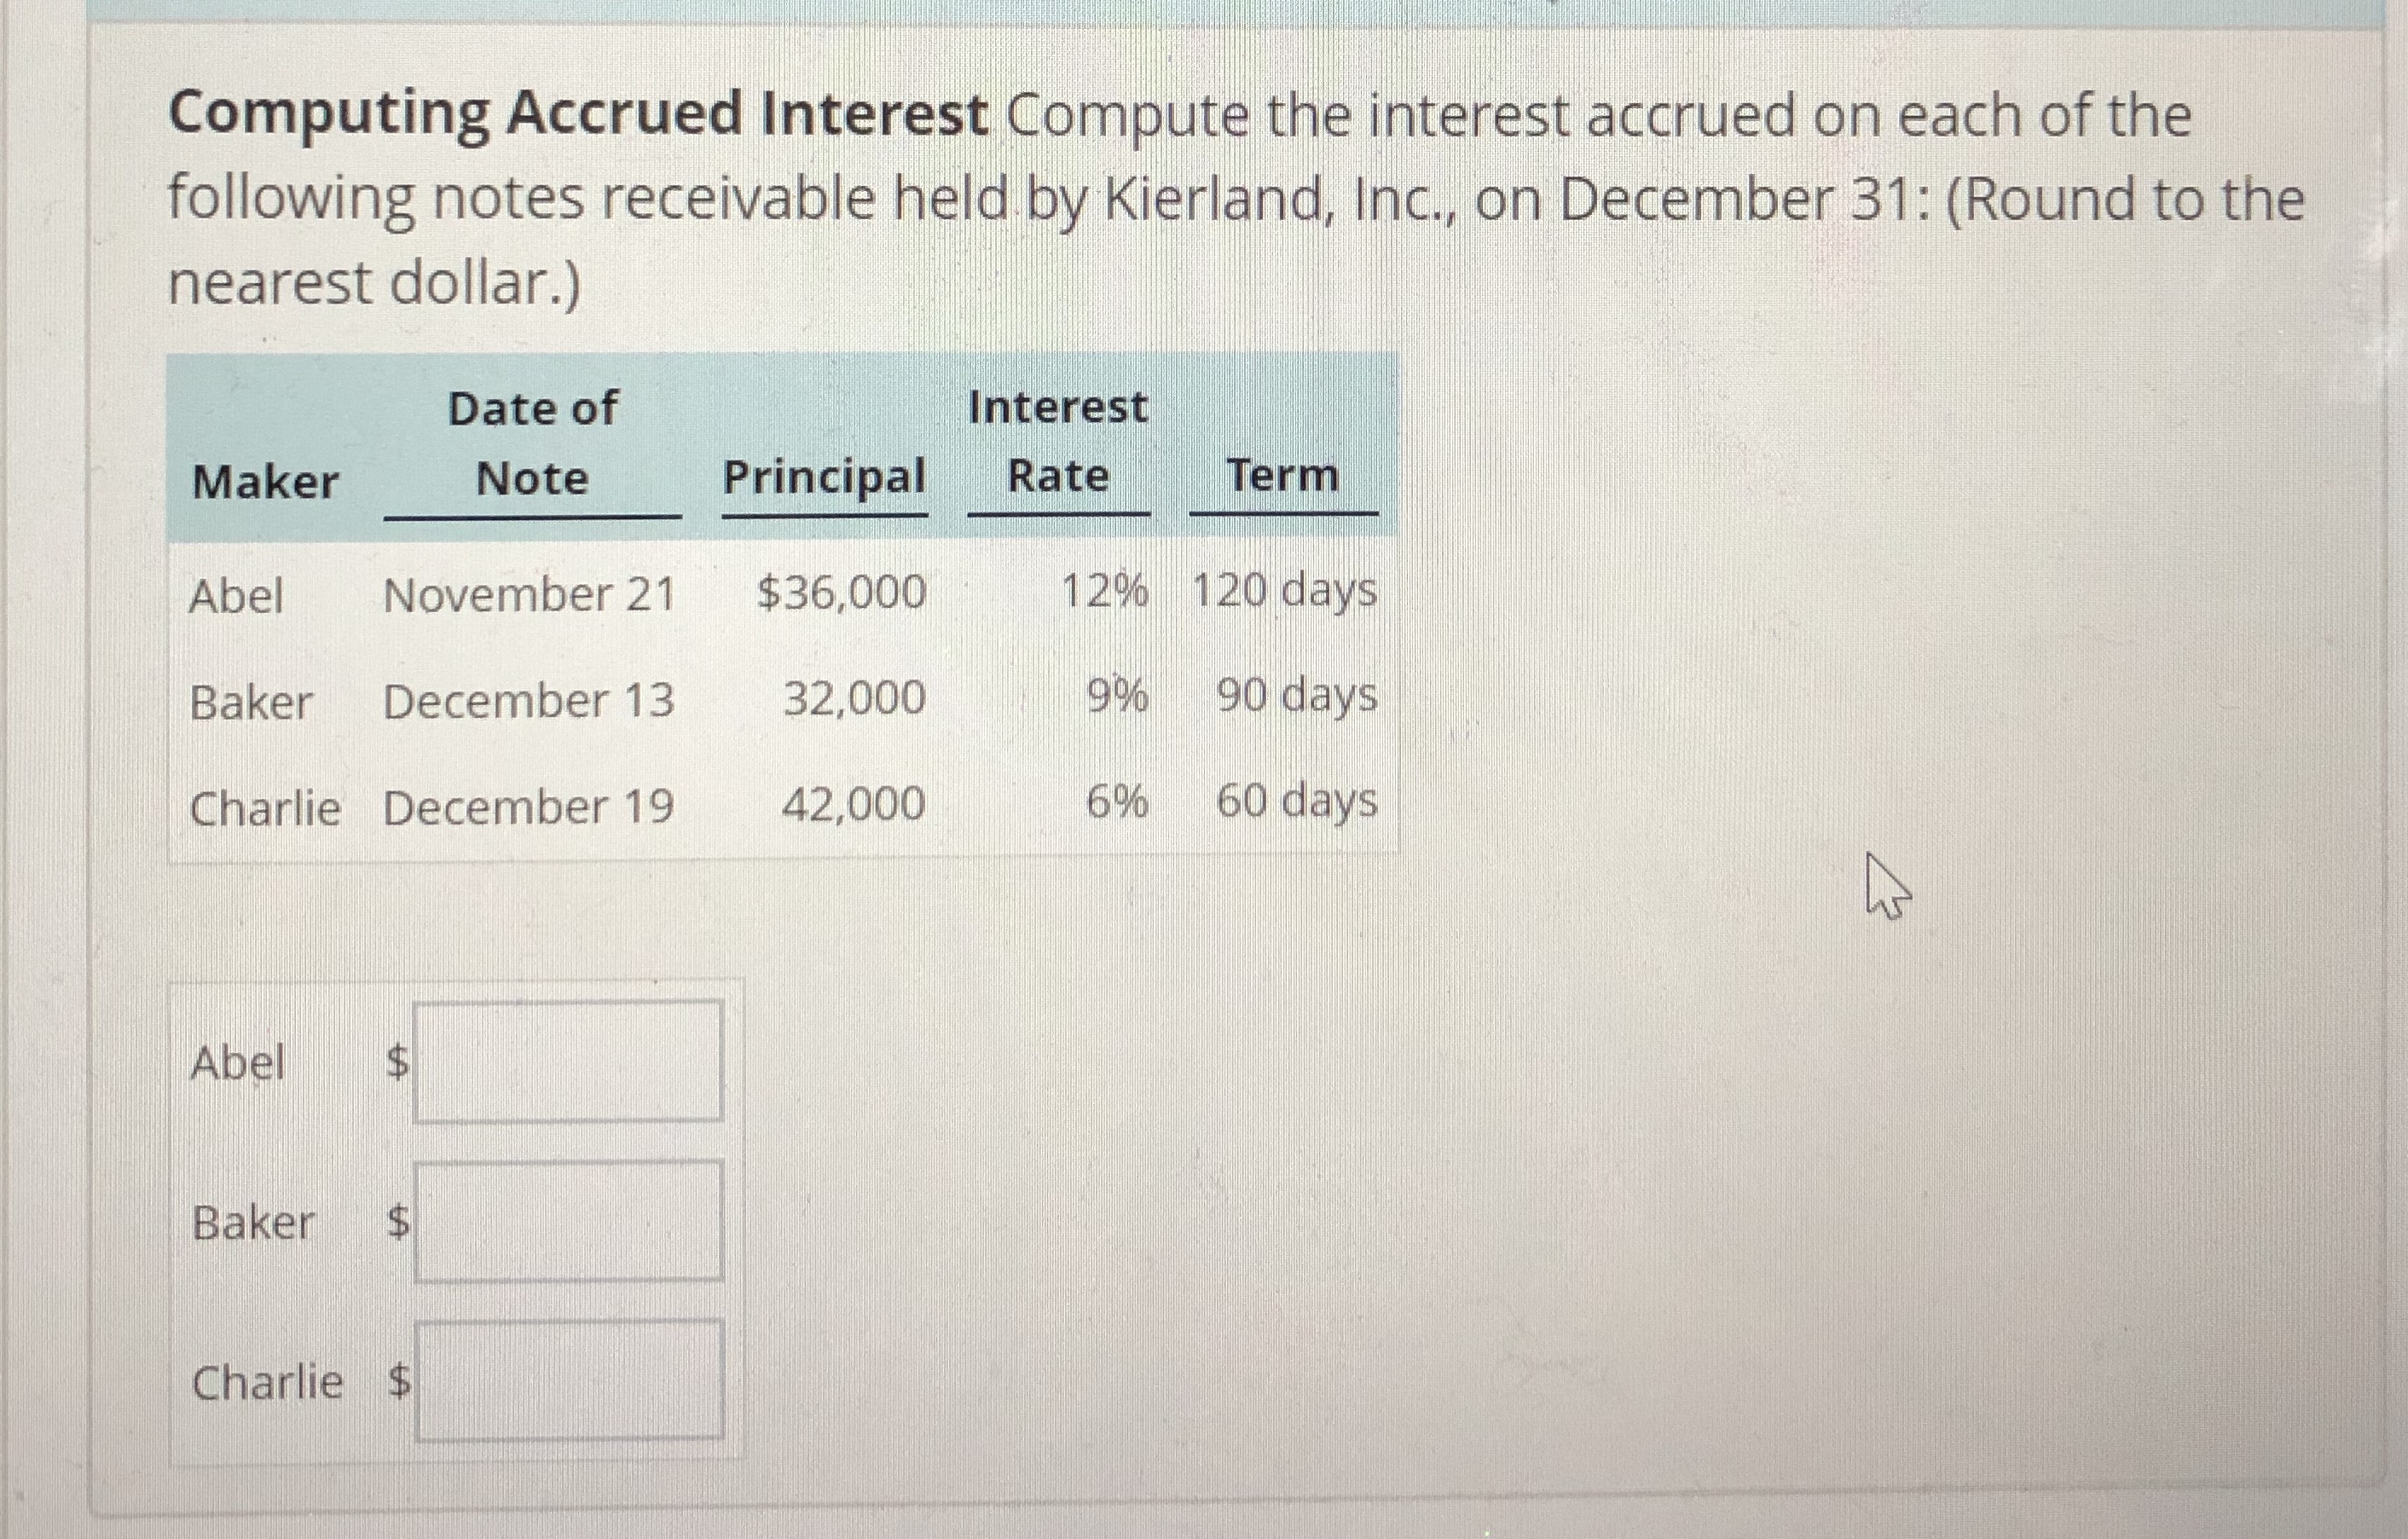 How Do You Calculate Accrued Interest On Notes Receivable